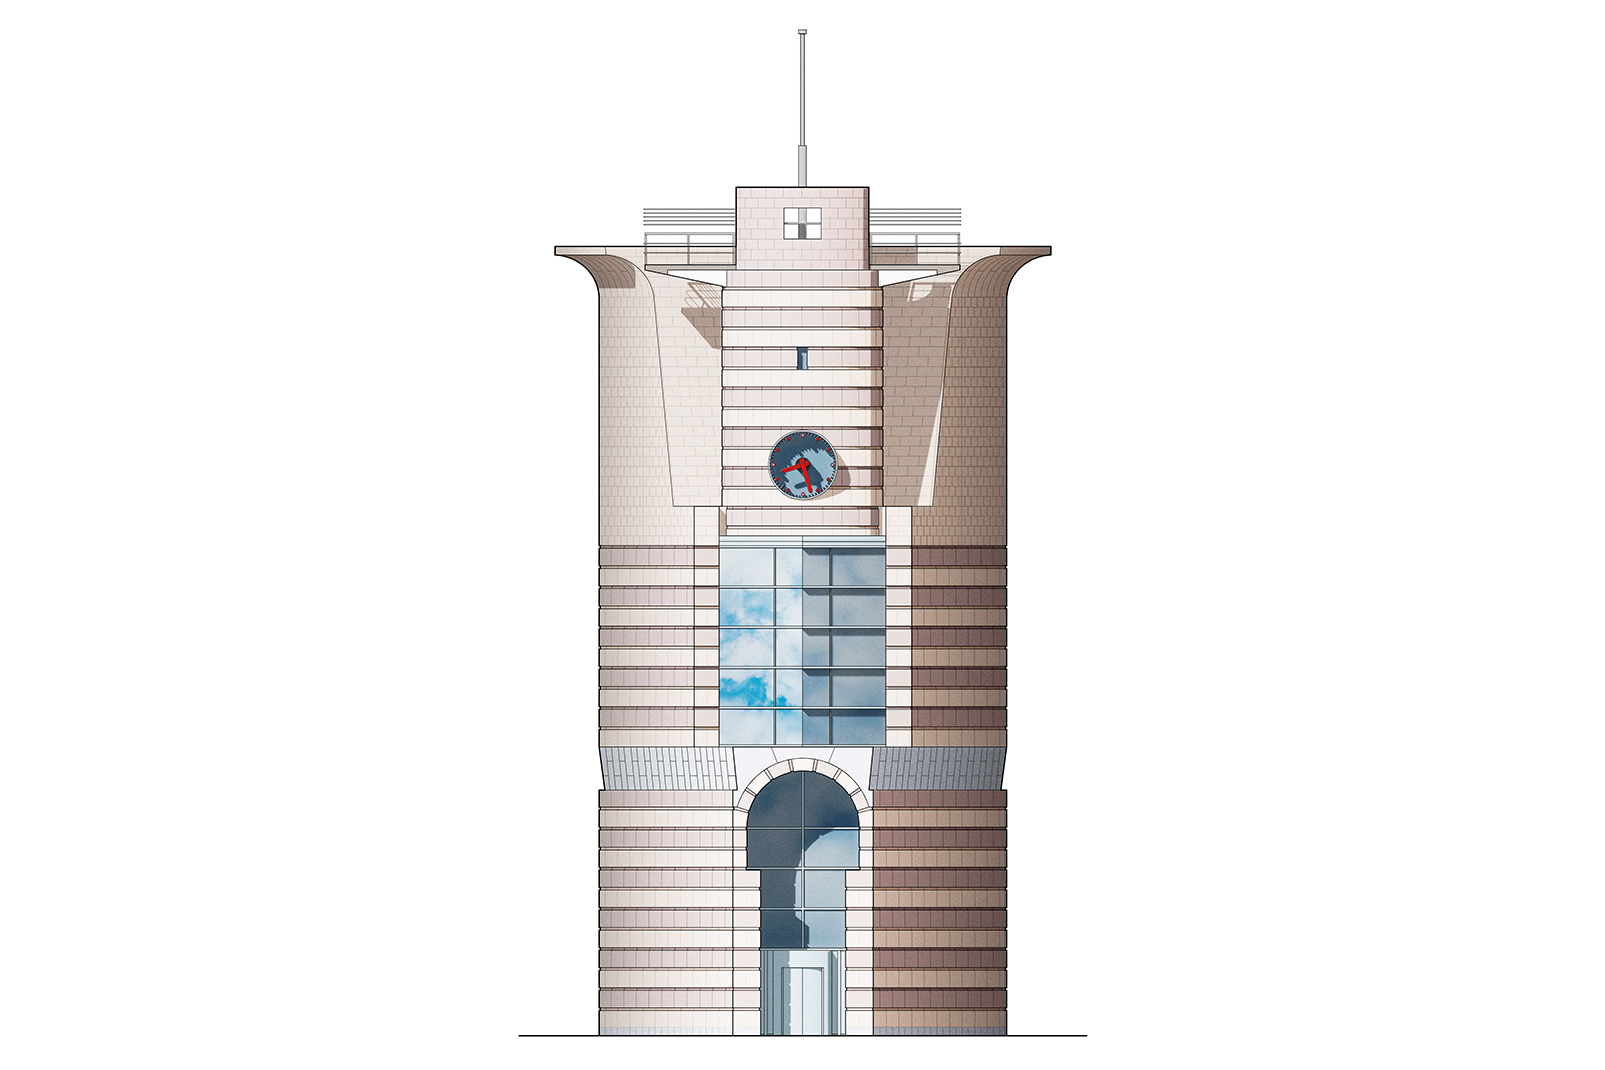 Measured drawing elevation of the clock tower, No 1 Poultry, City of London